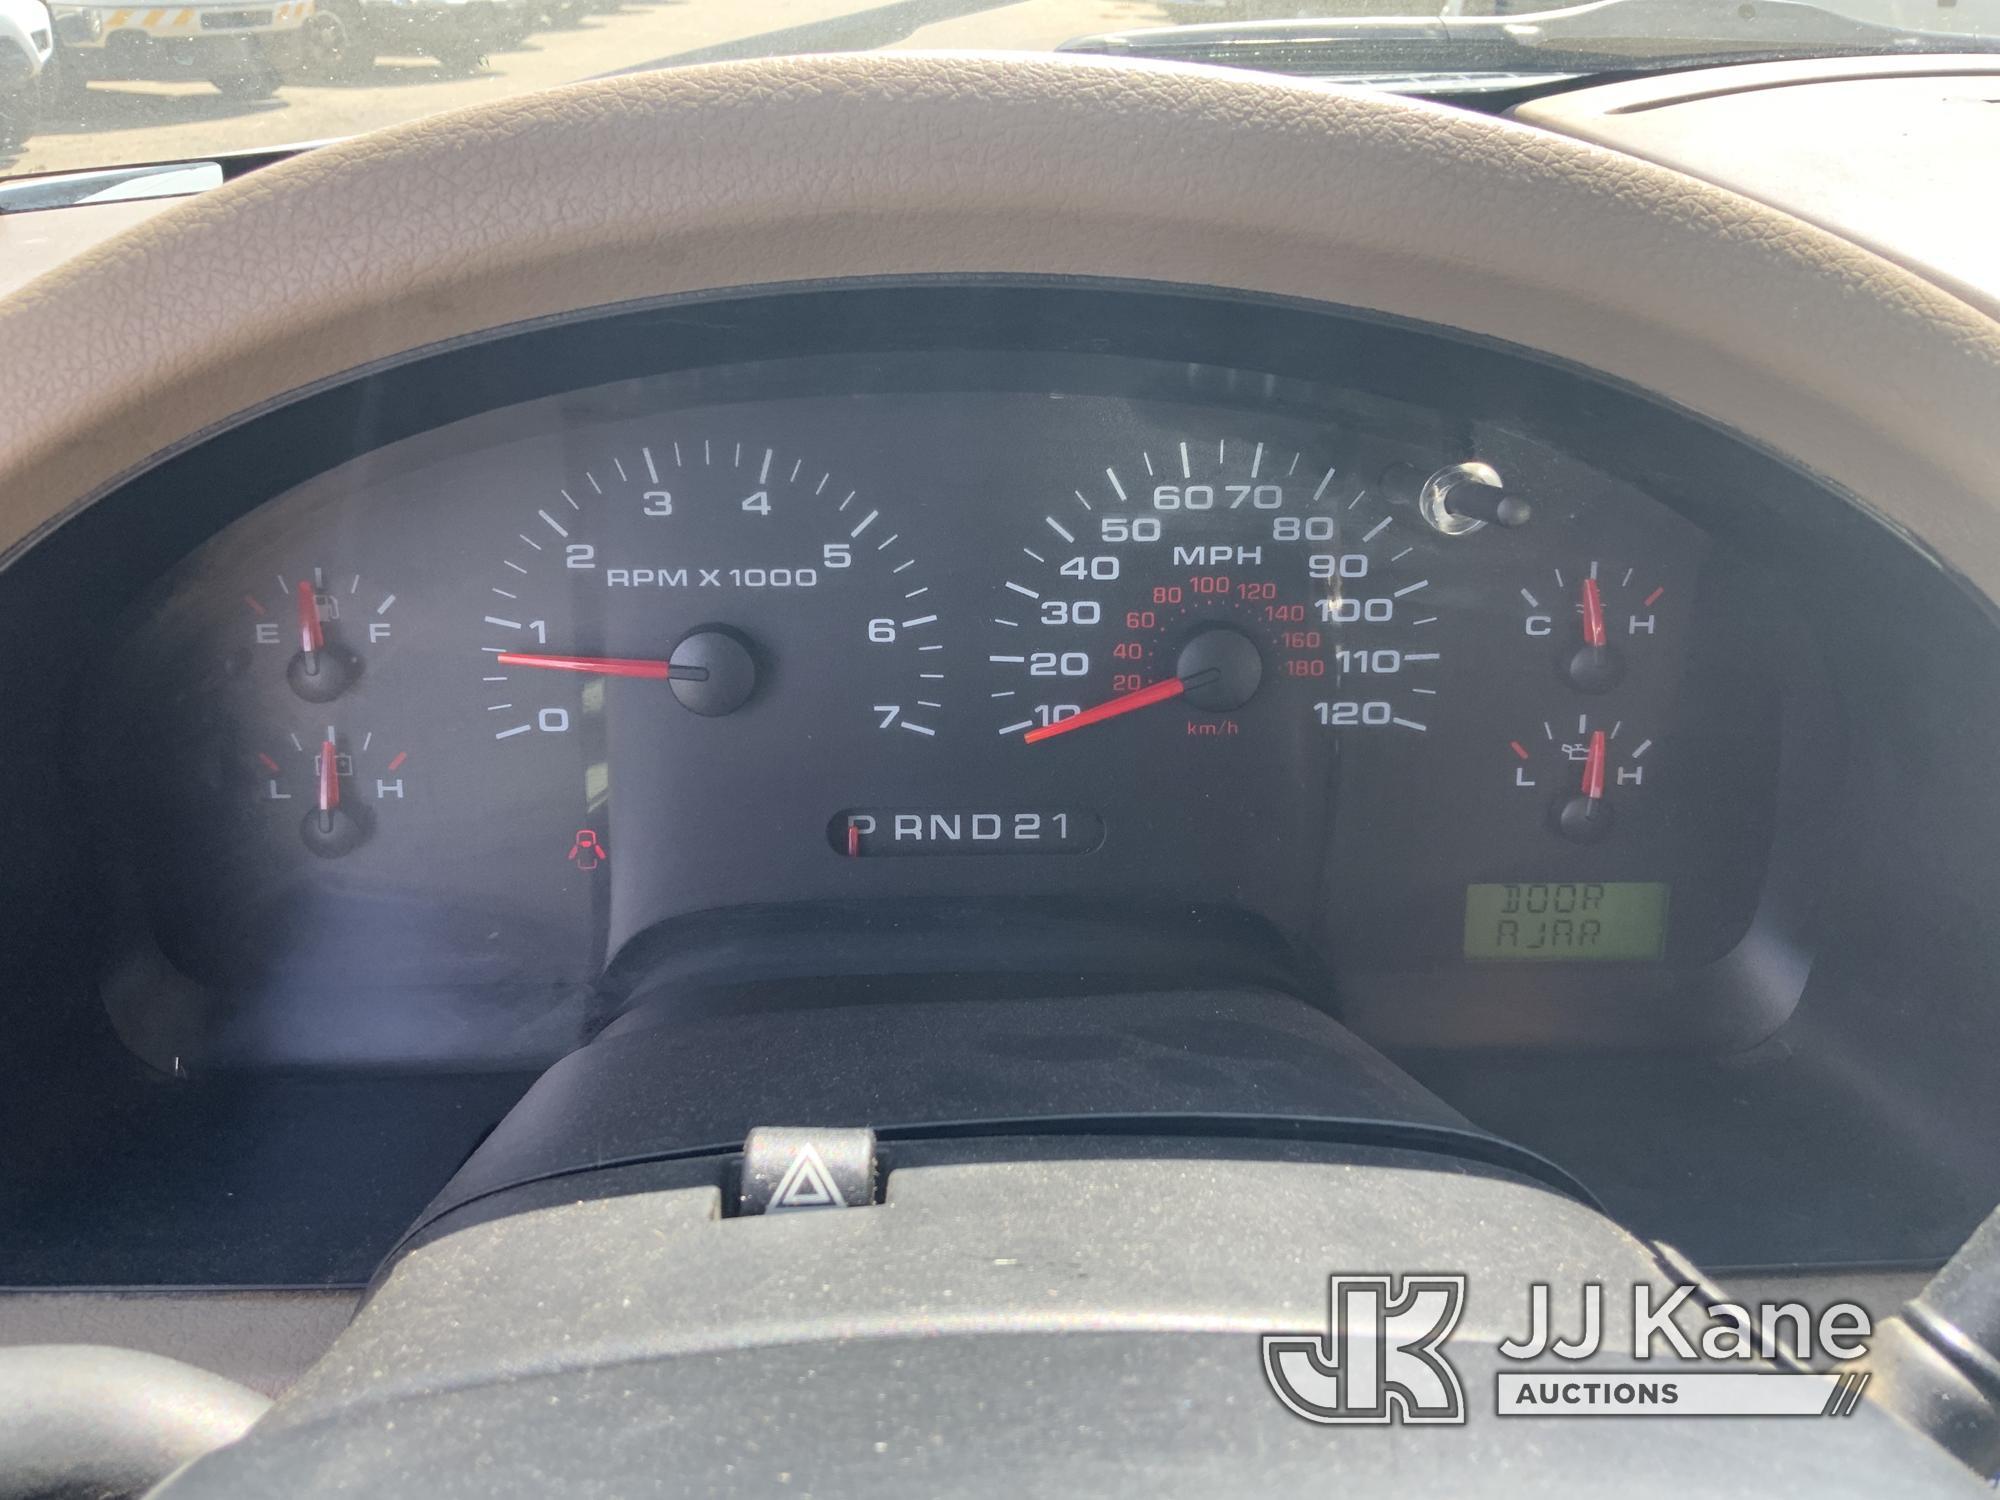 (Dixon, CA) 2007 Ford F150 Extended-Cab Pickup Truck Runs & Moves) (Has Engine Tick